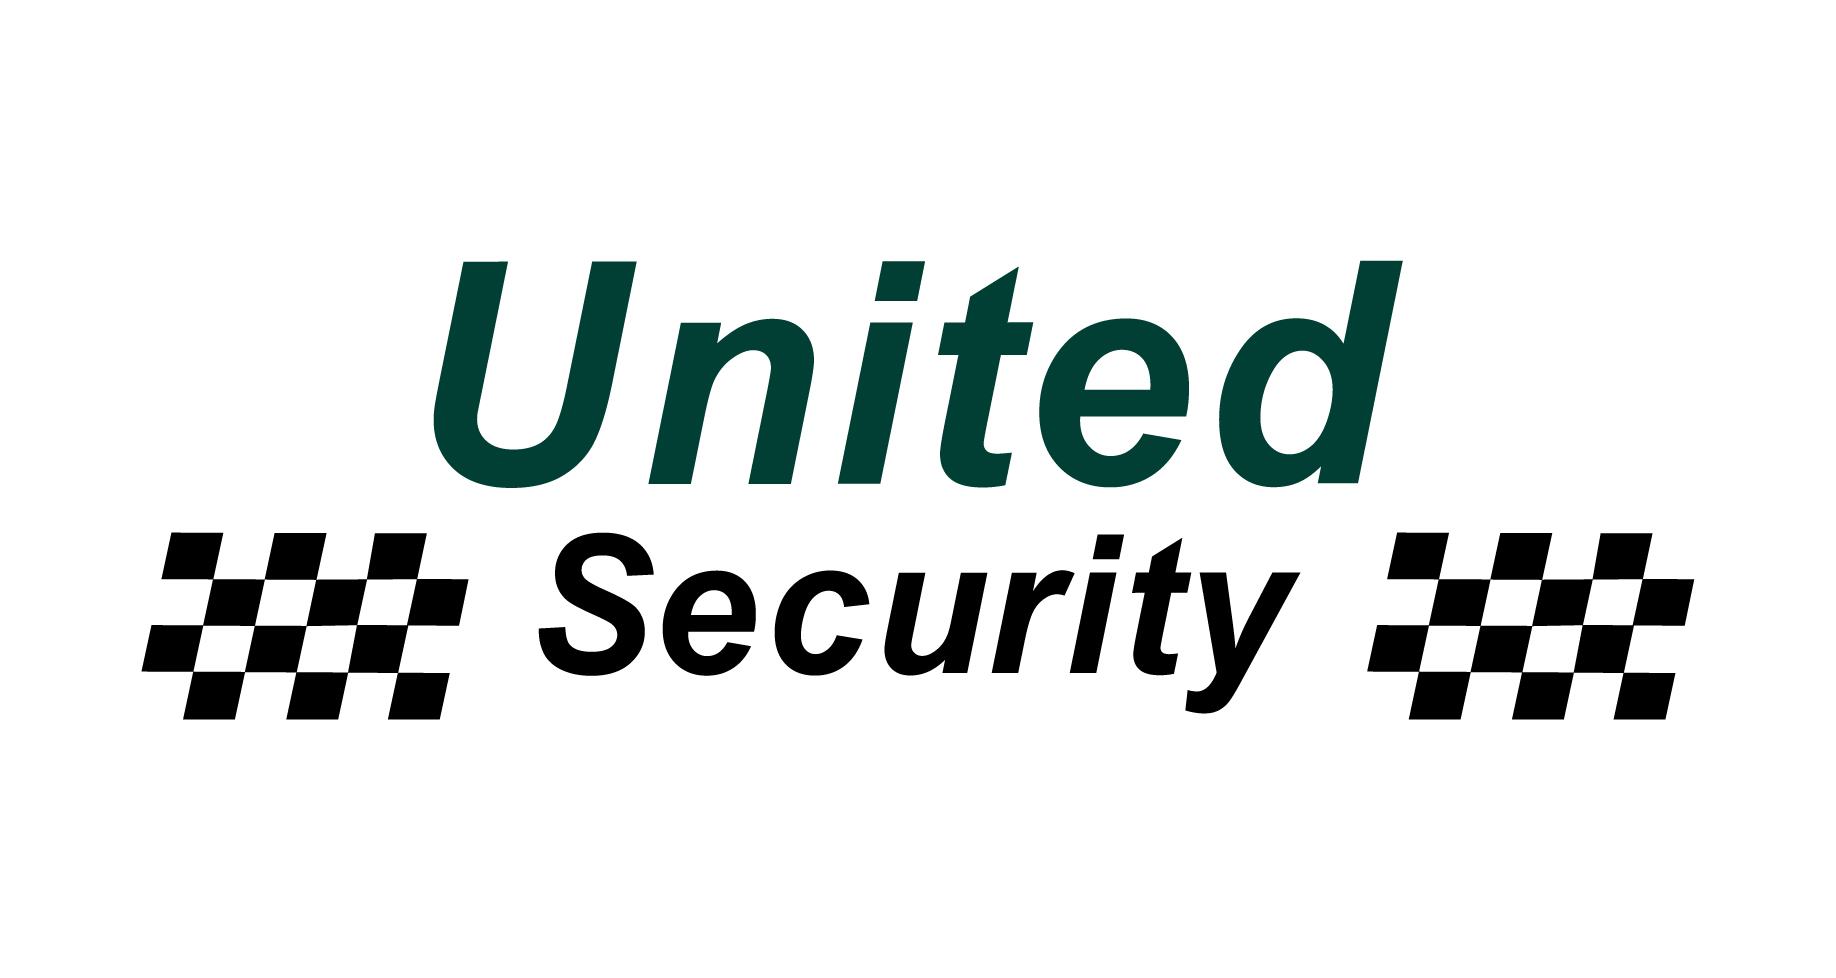 The logo of United Security